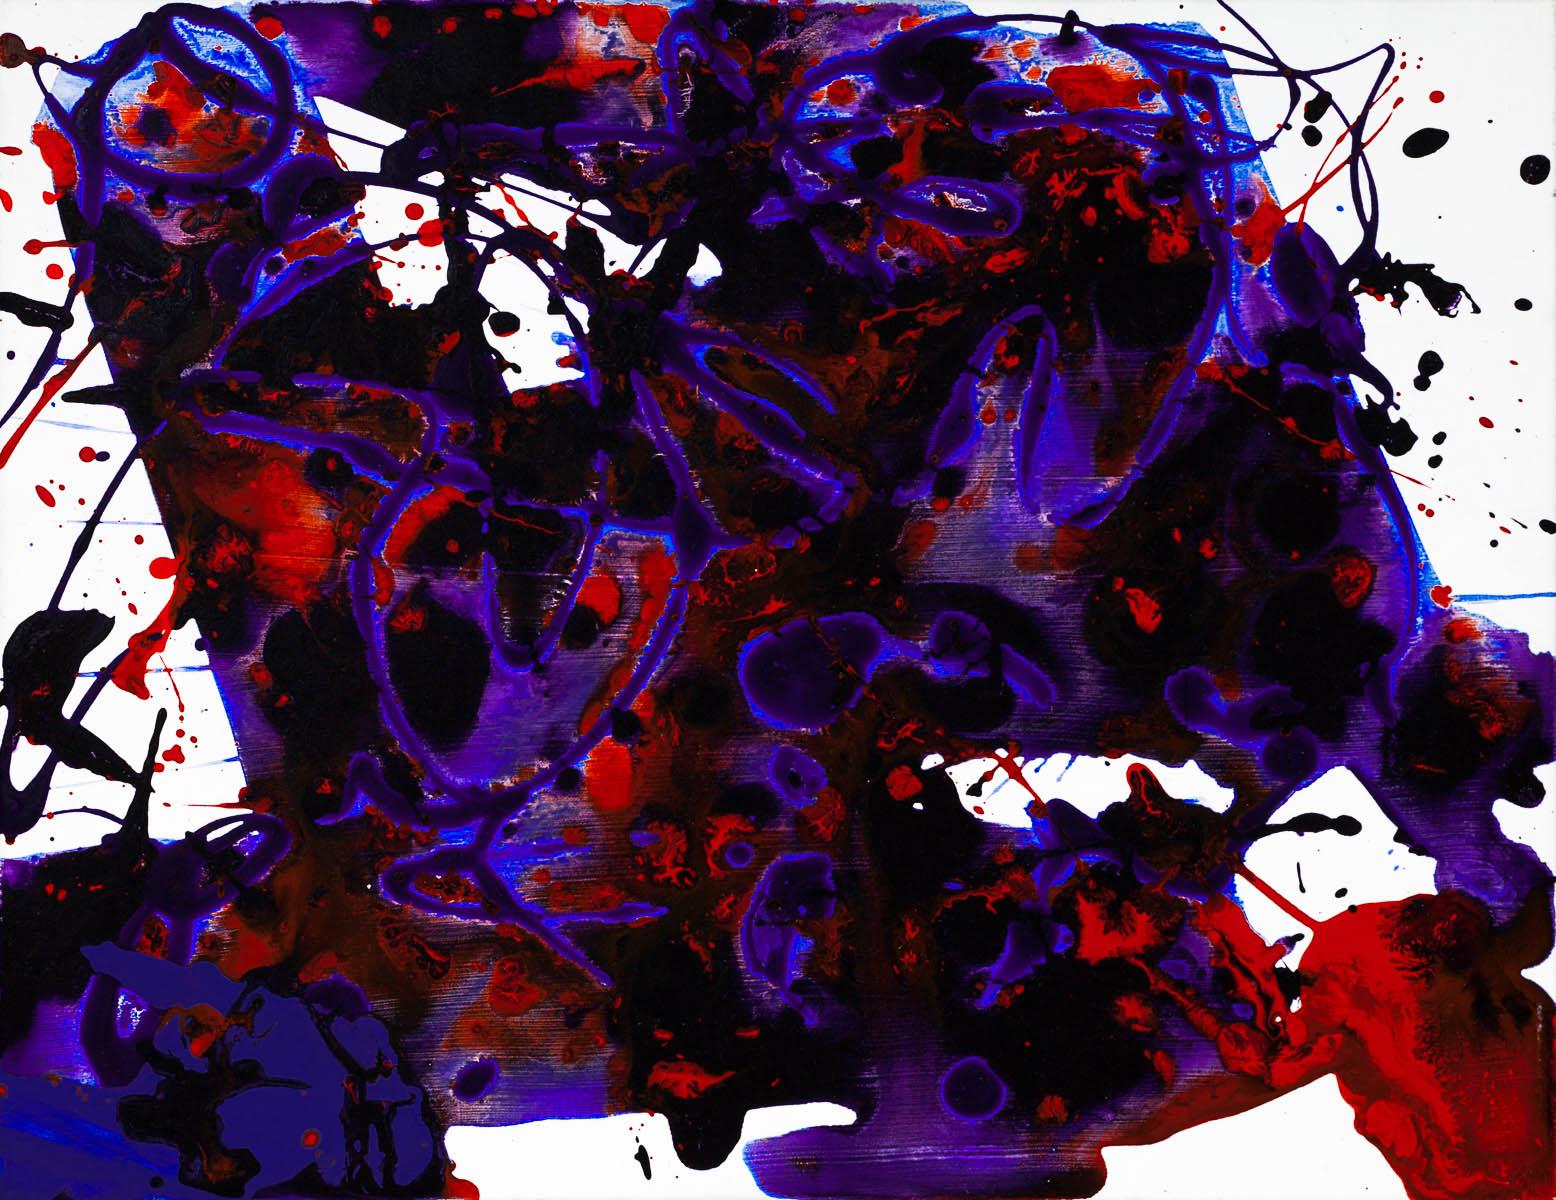 Sam Francis Abstract Painting - Untitled, 1994 (SFP94-6)